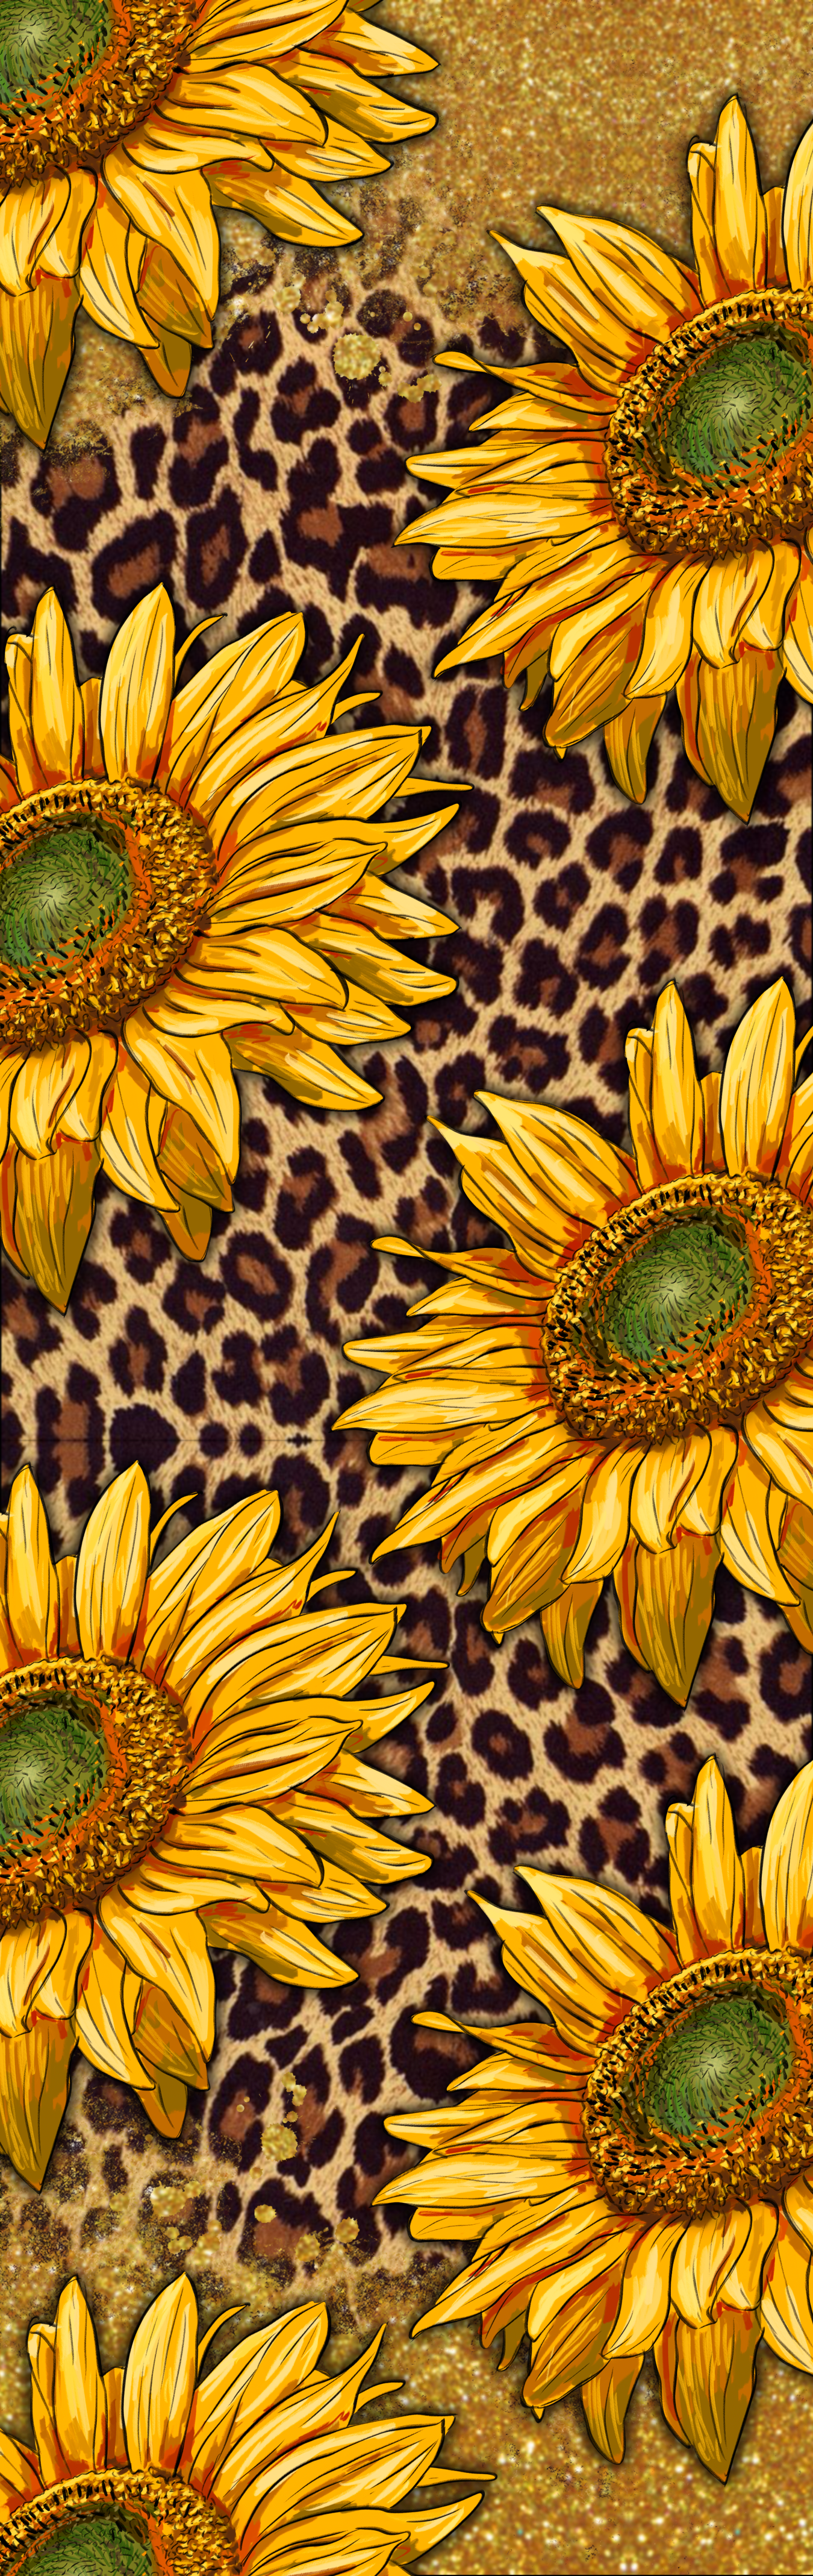 SUNFLOWER WITH LEOPARD